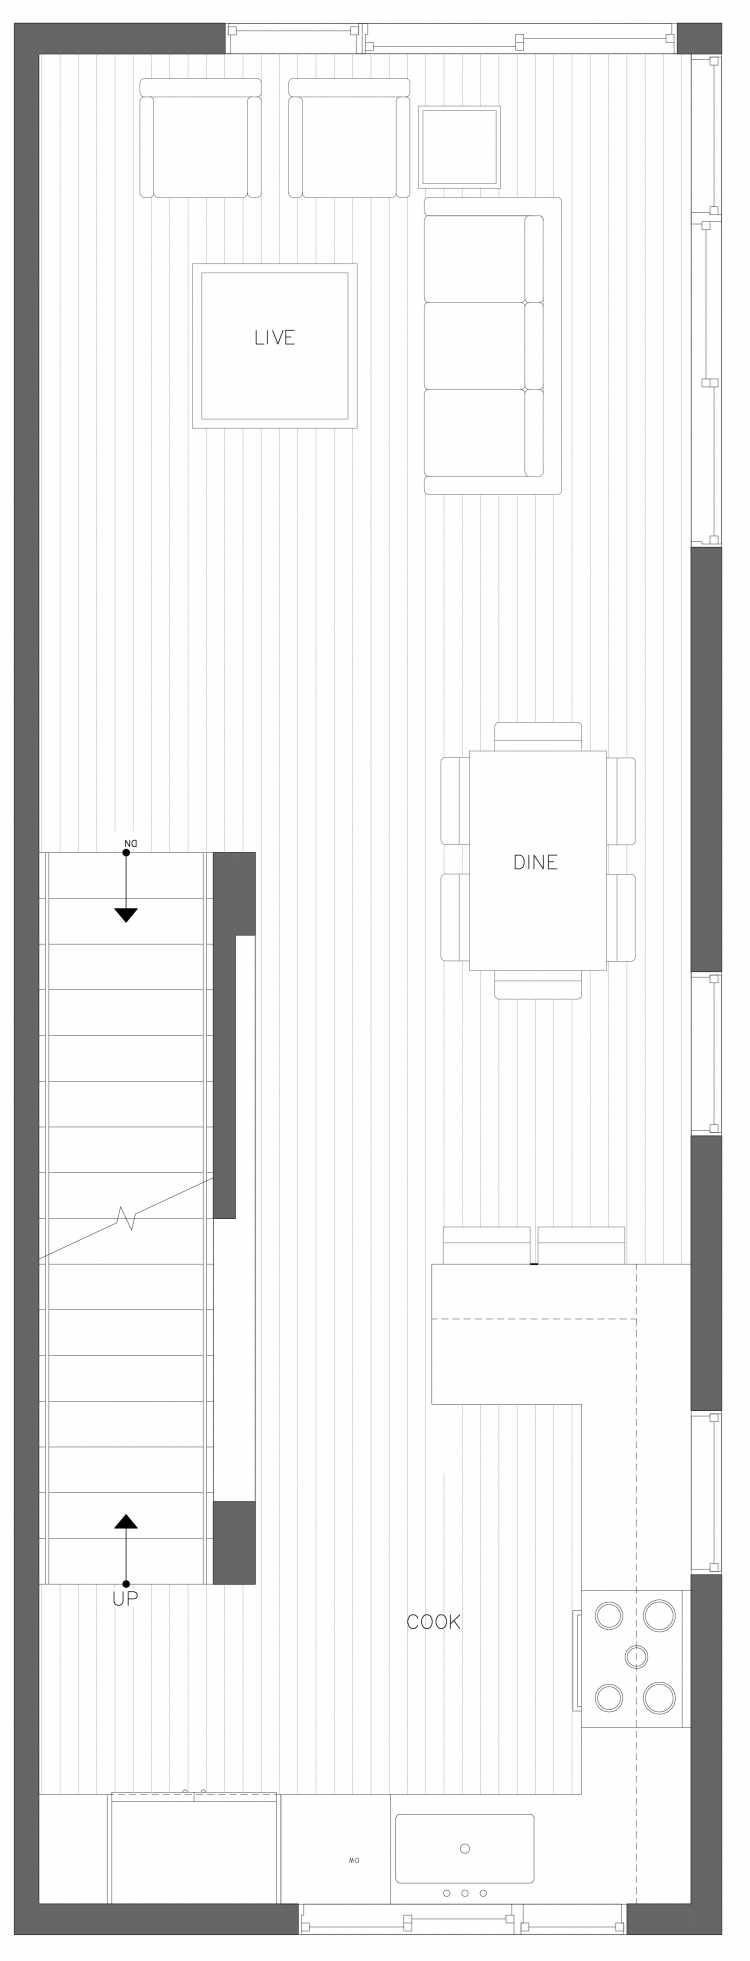 Second Floor Plan of 3406D 15th Ave W, One of the Arlo Townhomes in North Queen Anne